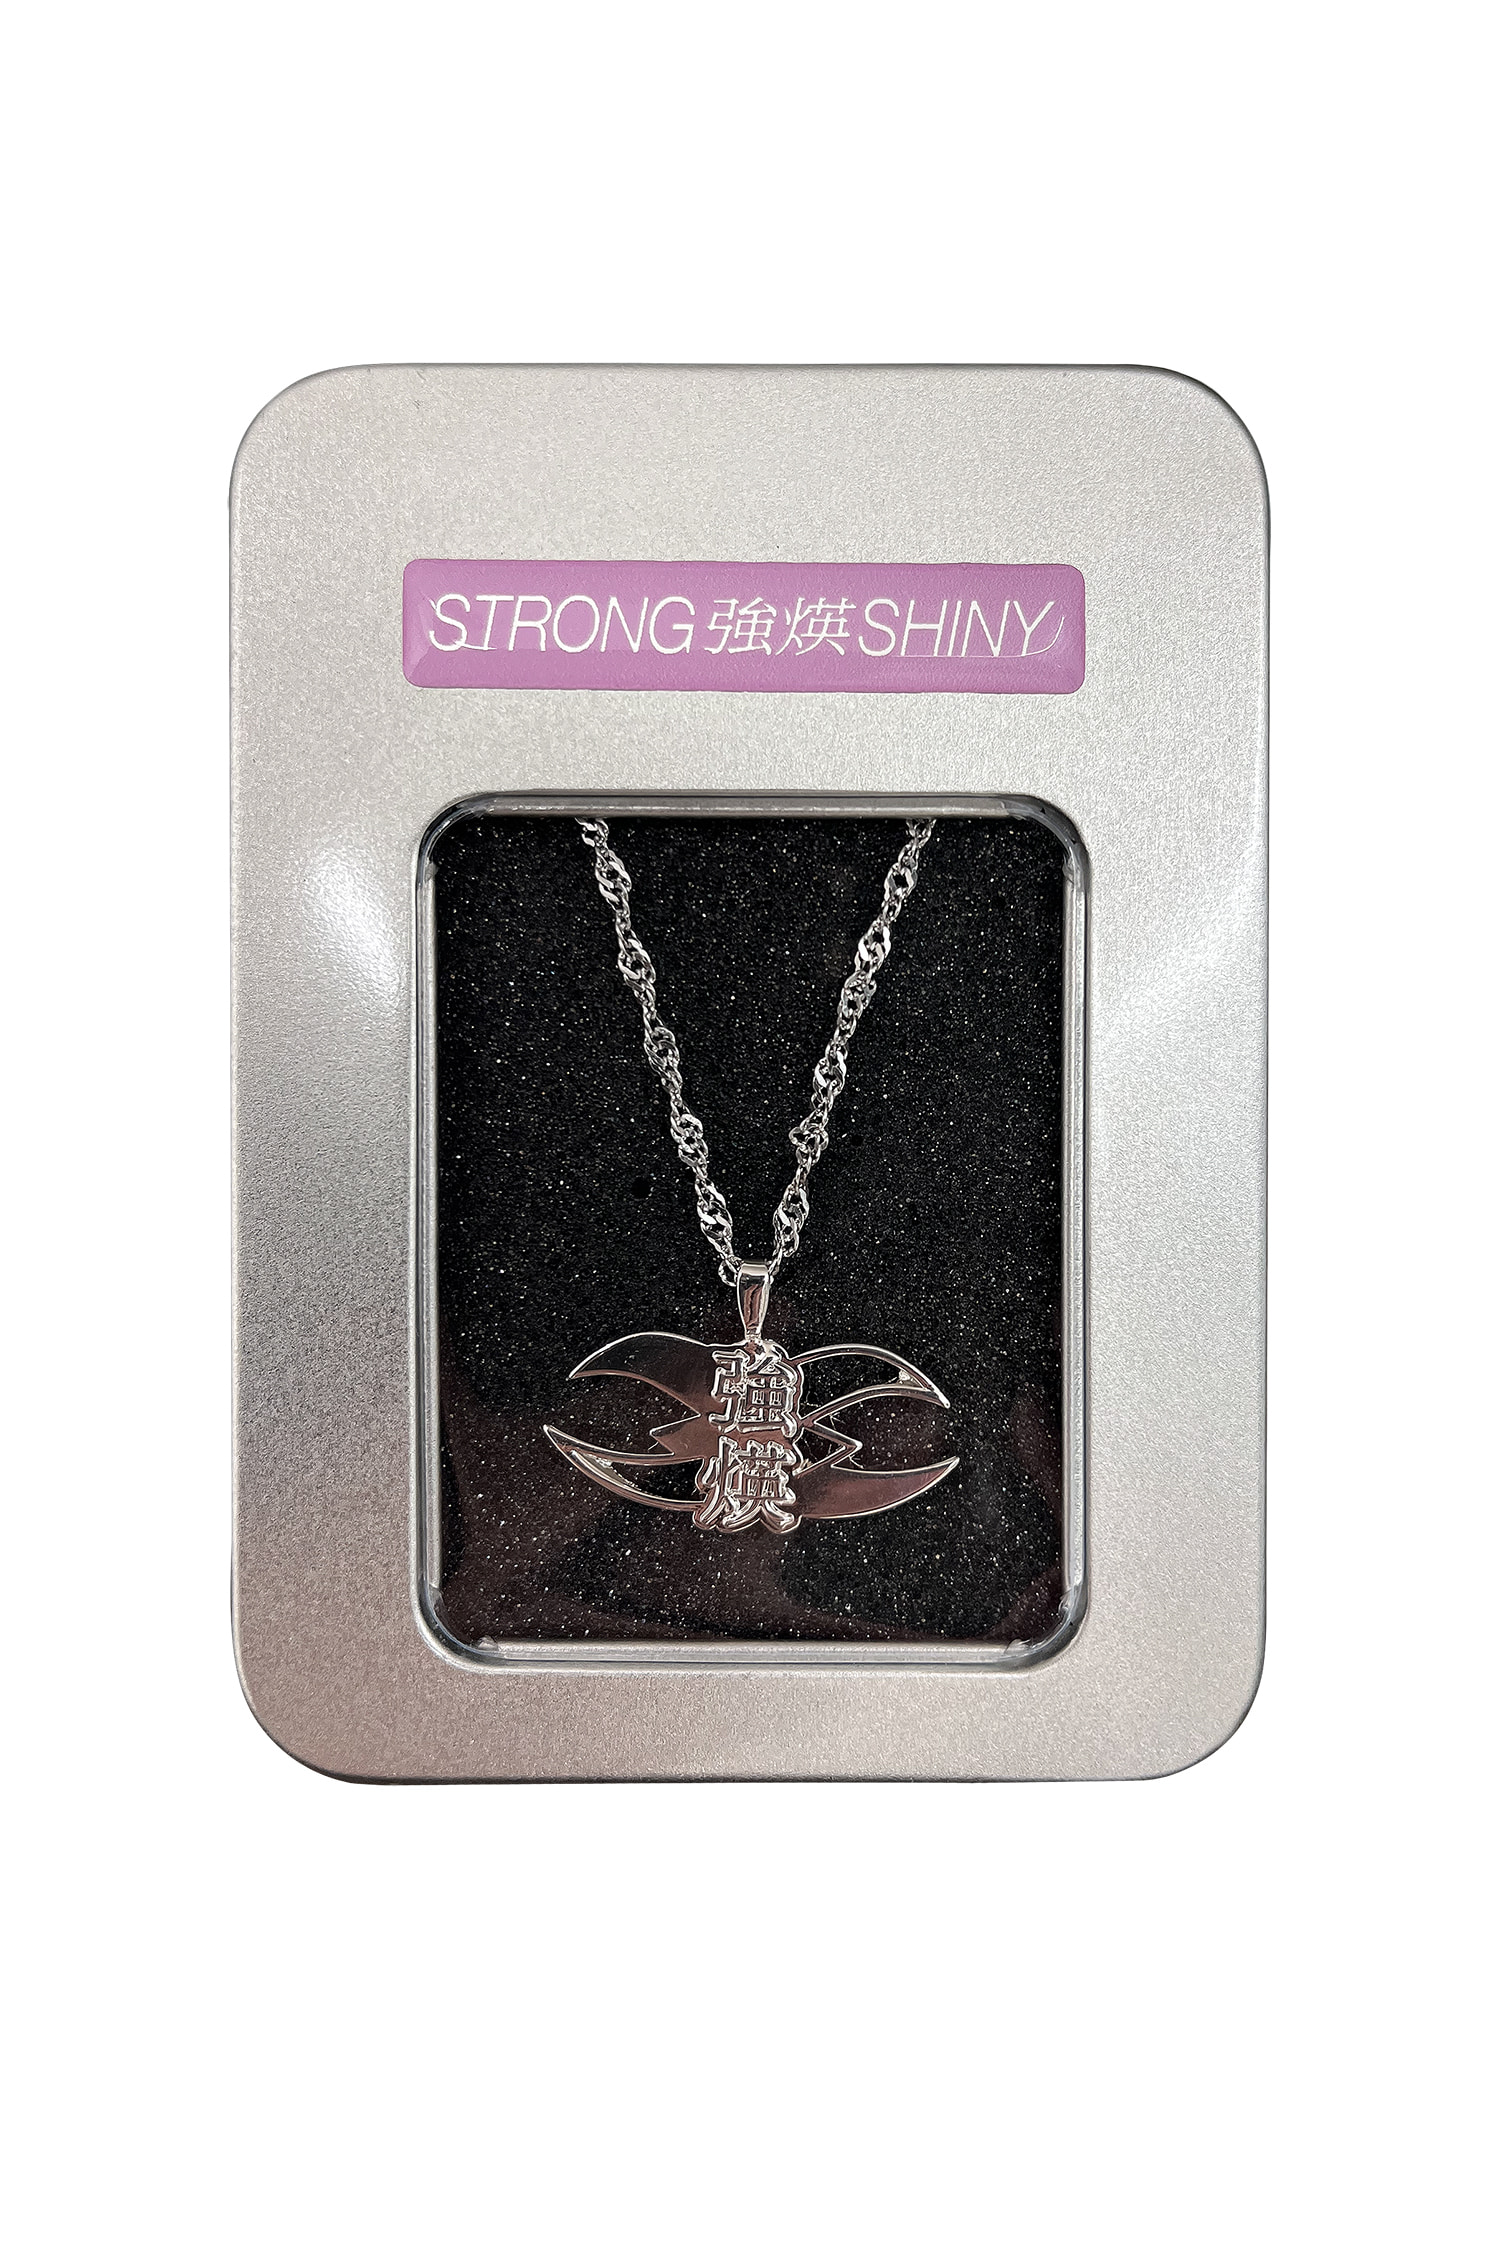 STAY STORNG AND SHINY NECKLACE